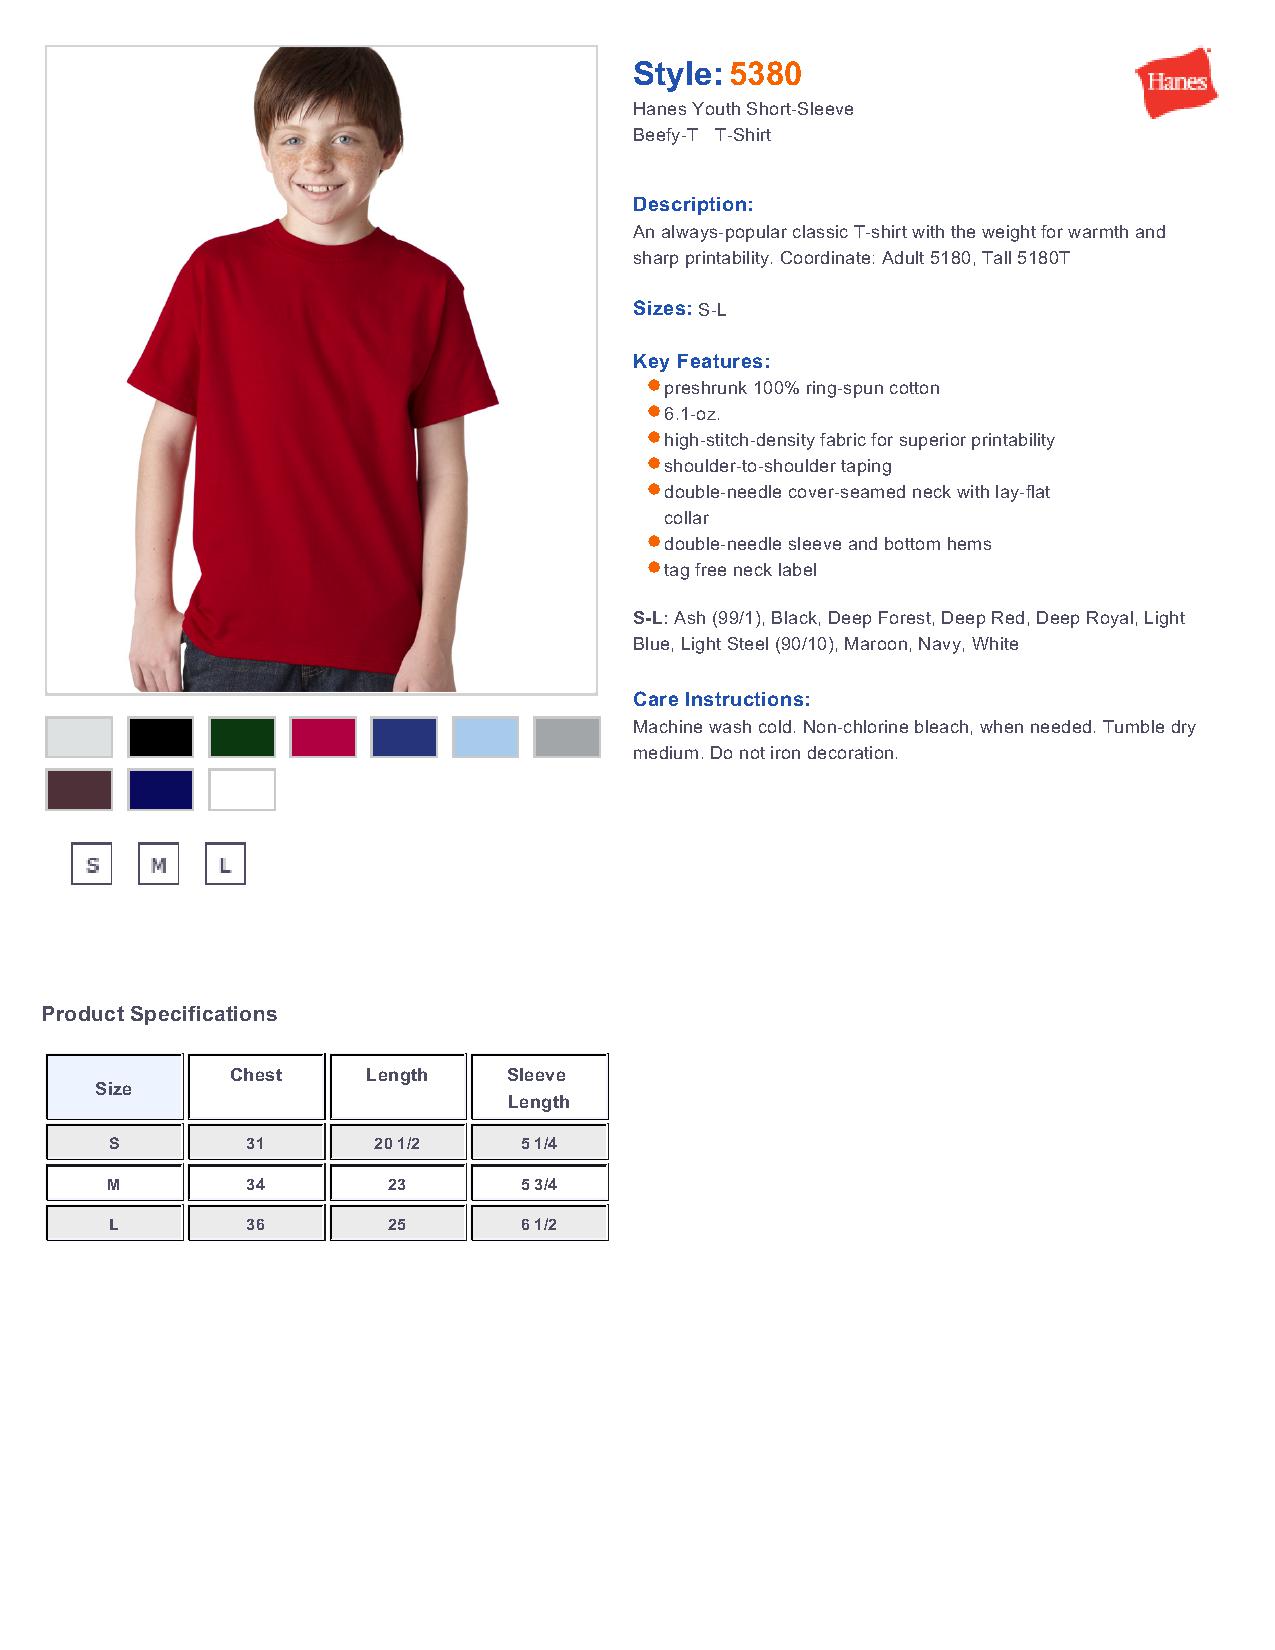 Hanes Beefy T Shirt Size Chart